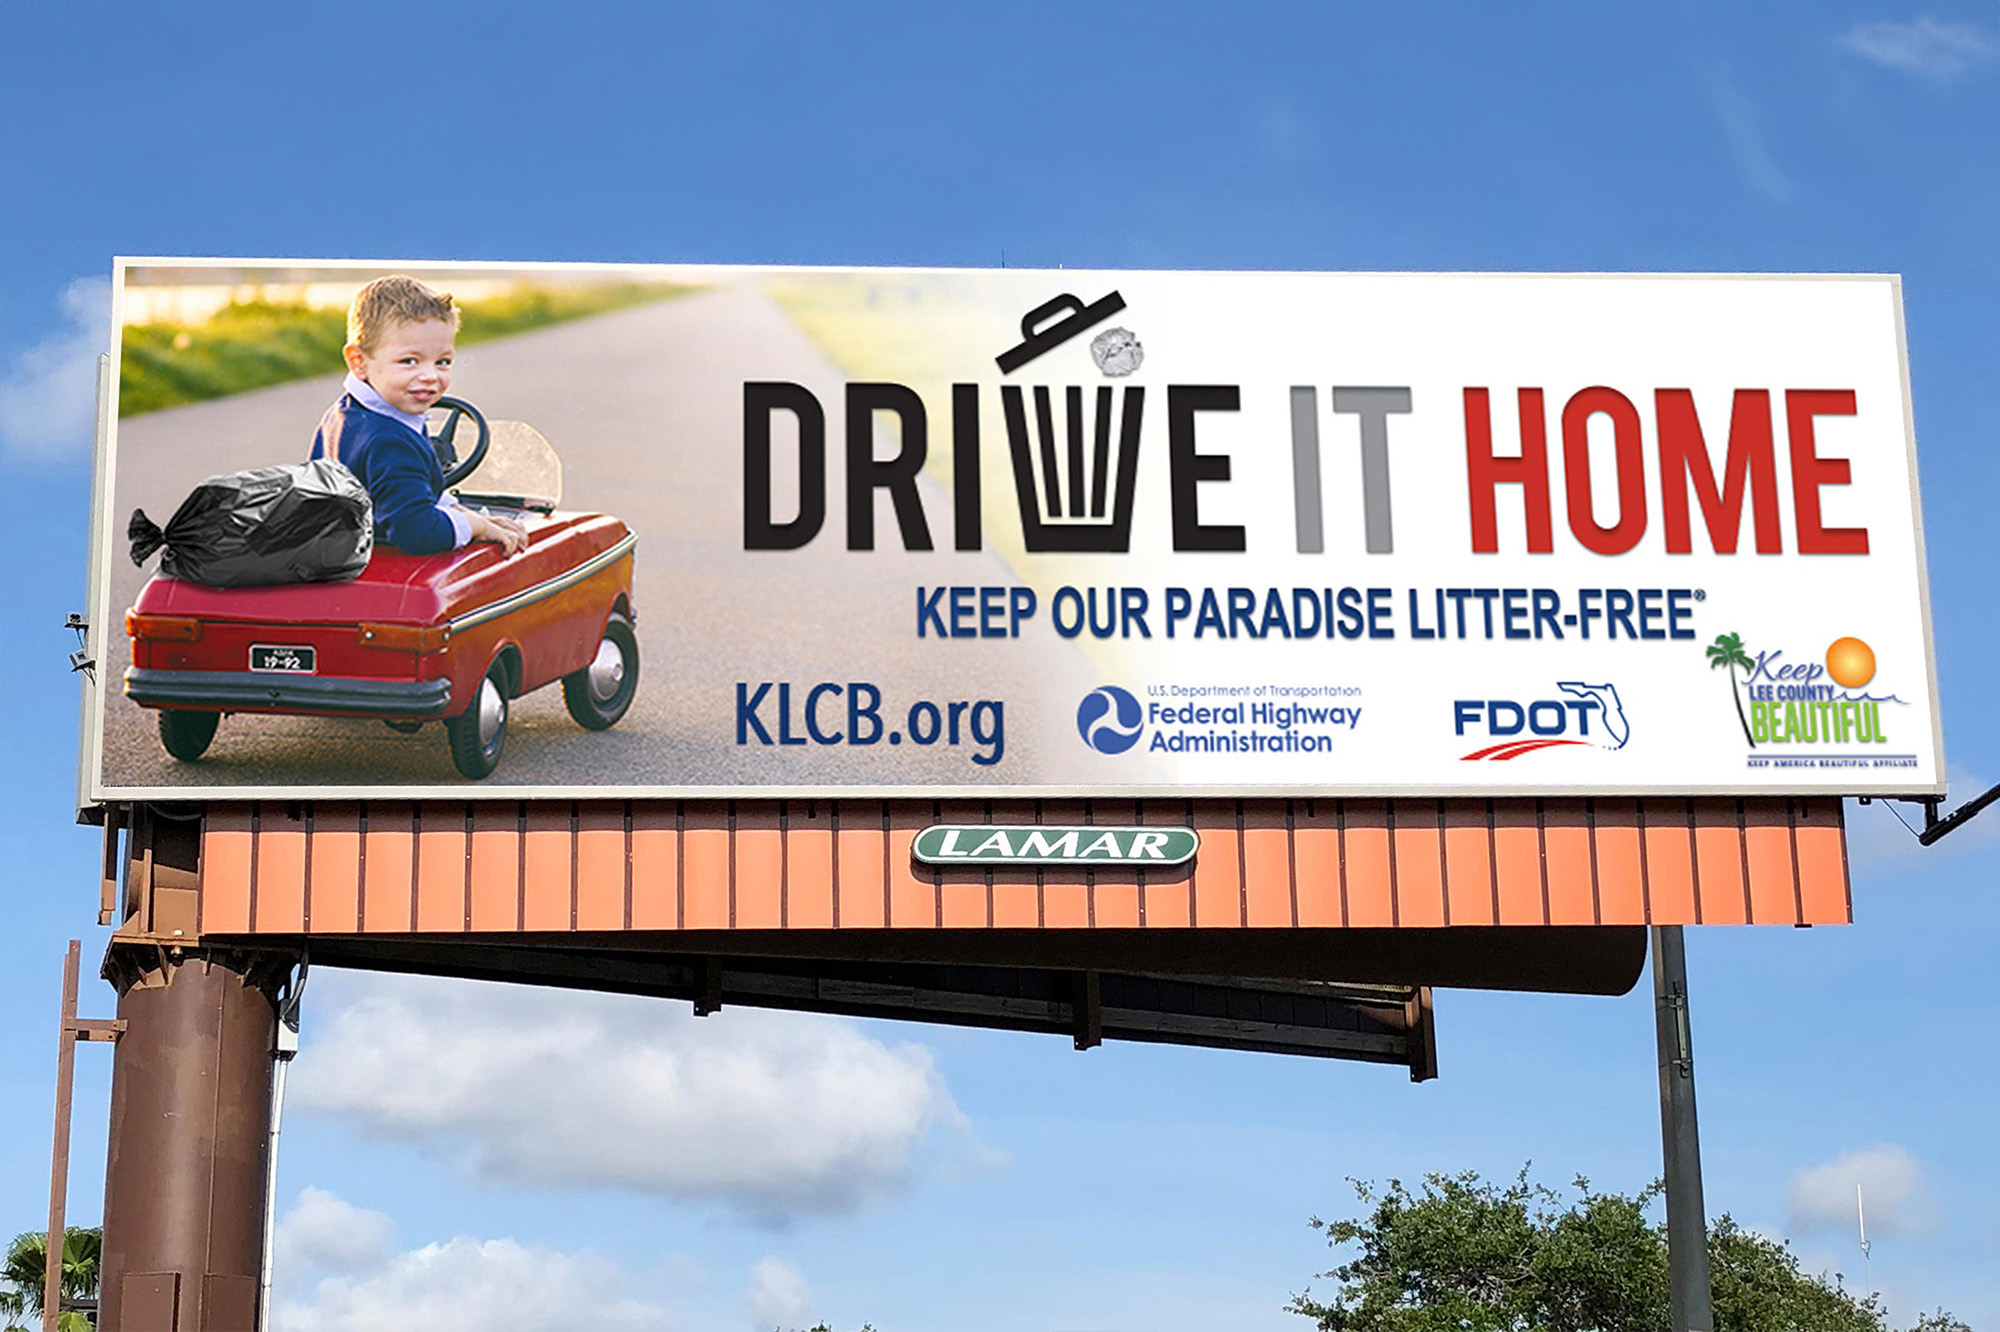 Billboard showing Drive It Home campaign ad